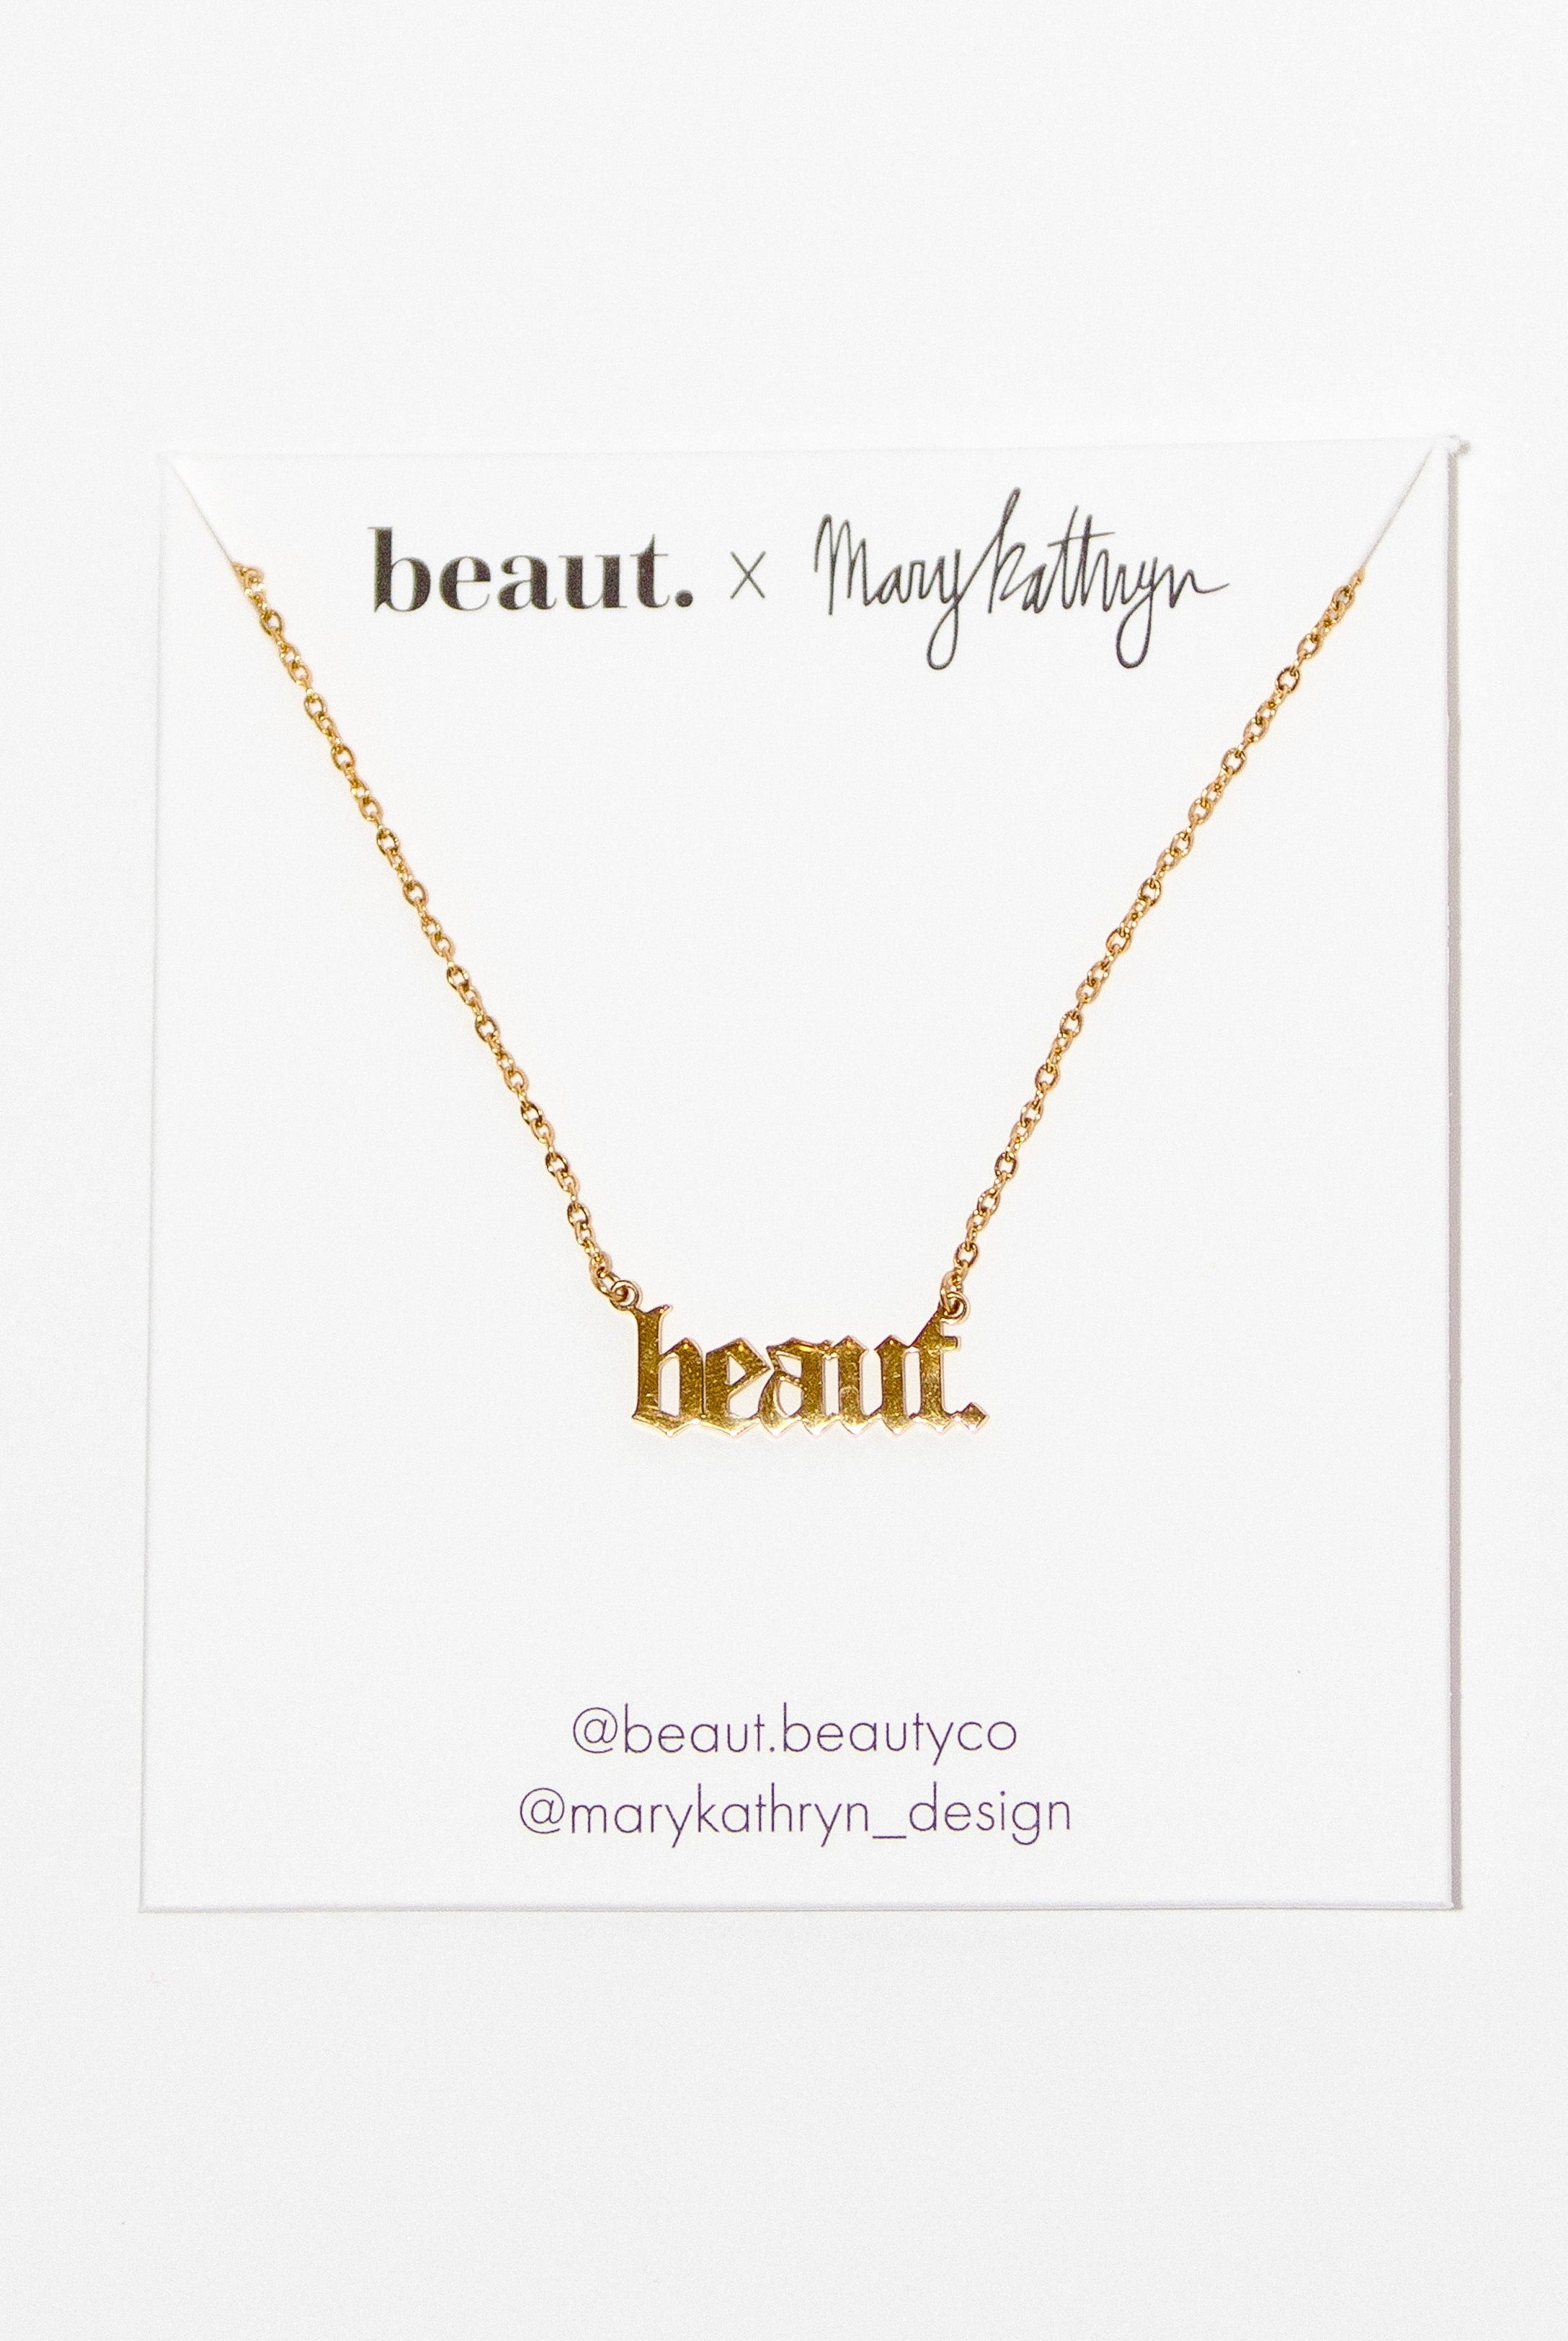 beaut. x mary kathryn necklace-Necklaces-beaut.beautyco.-The Lovely Closet, Women's Fashion Boutique in Alexandria, KY